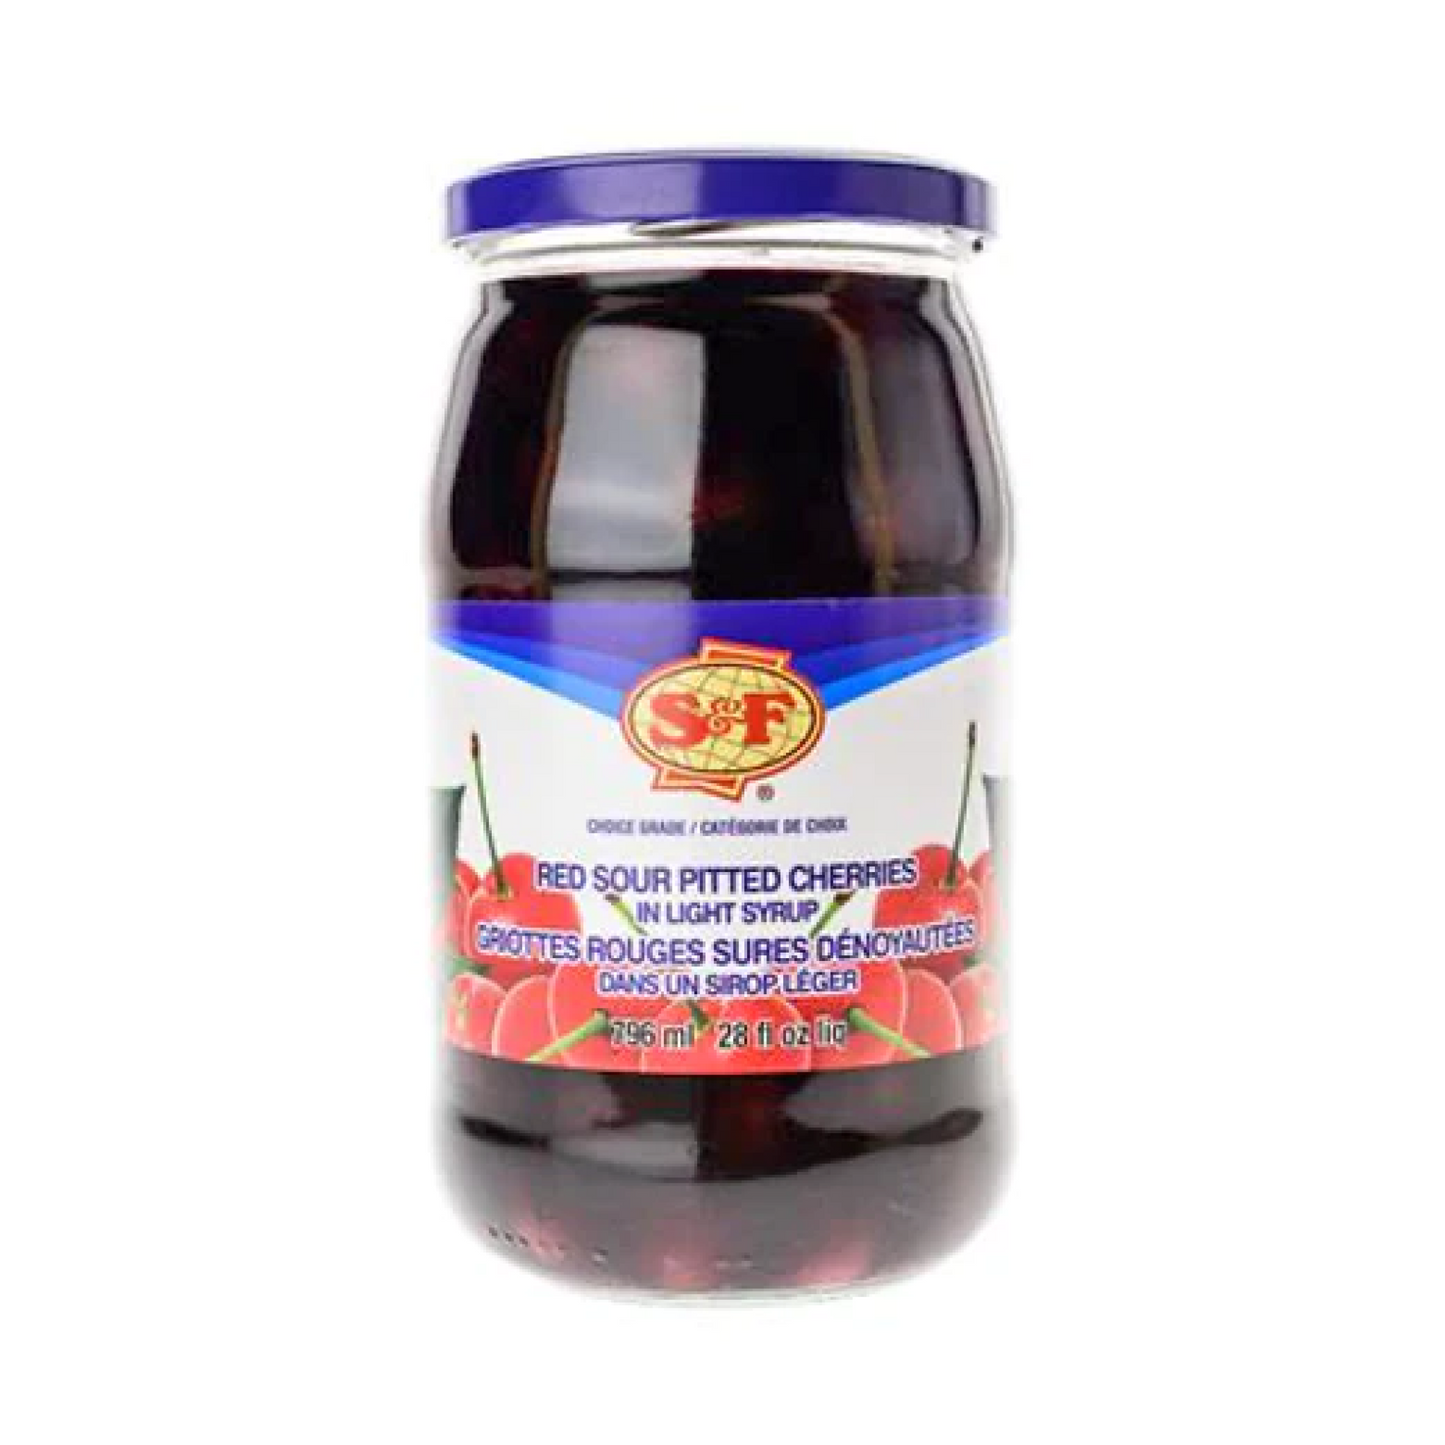 S&F Sour Pitted Cherries 796ml